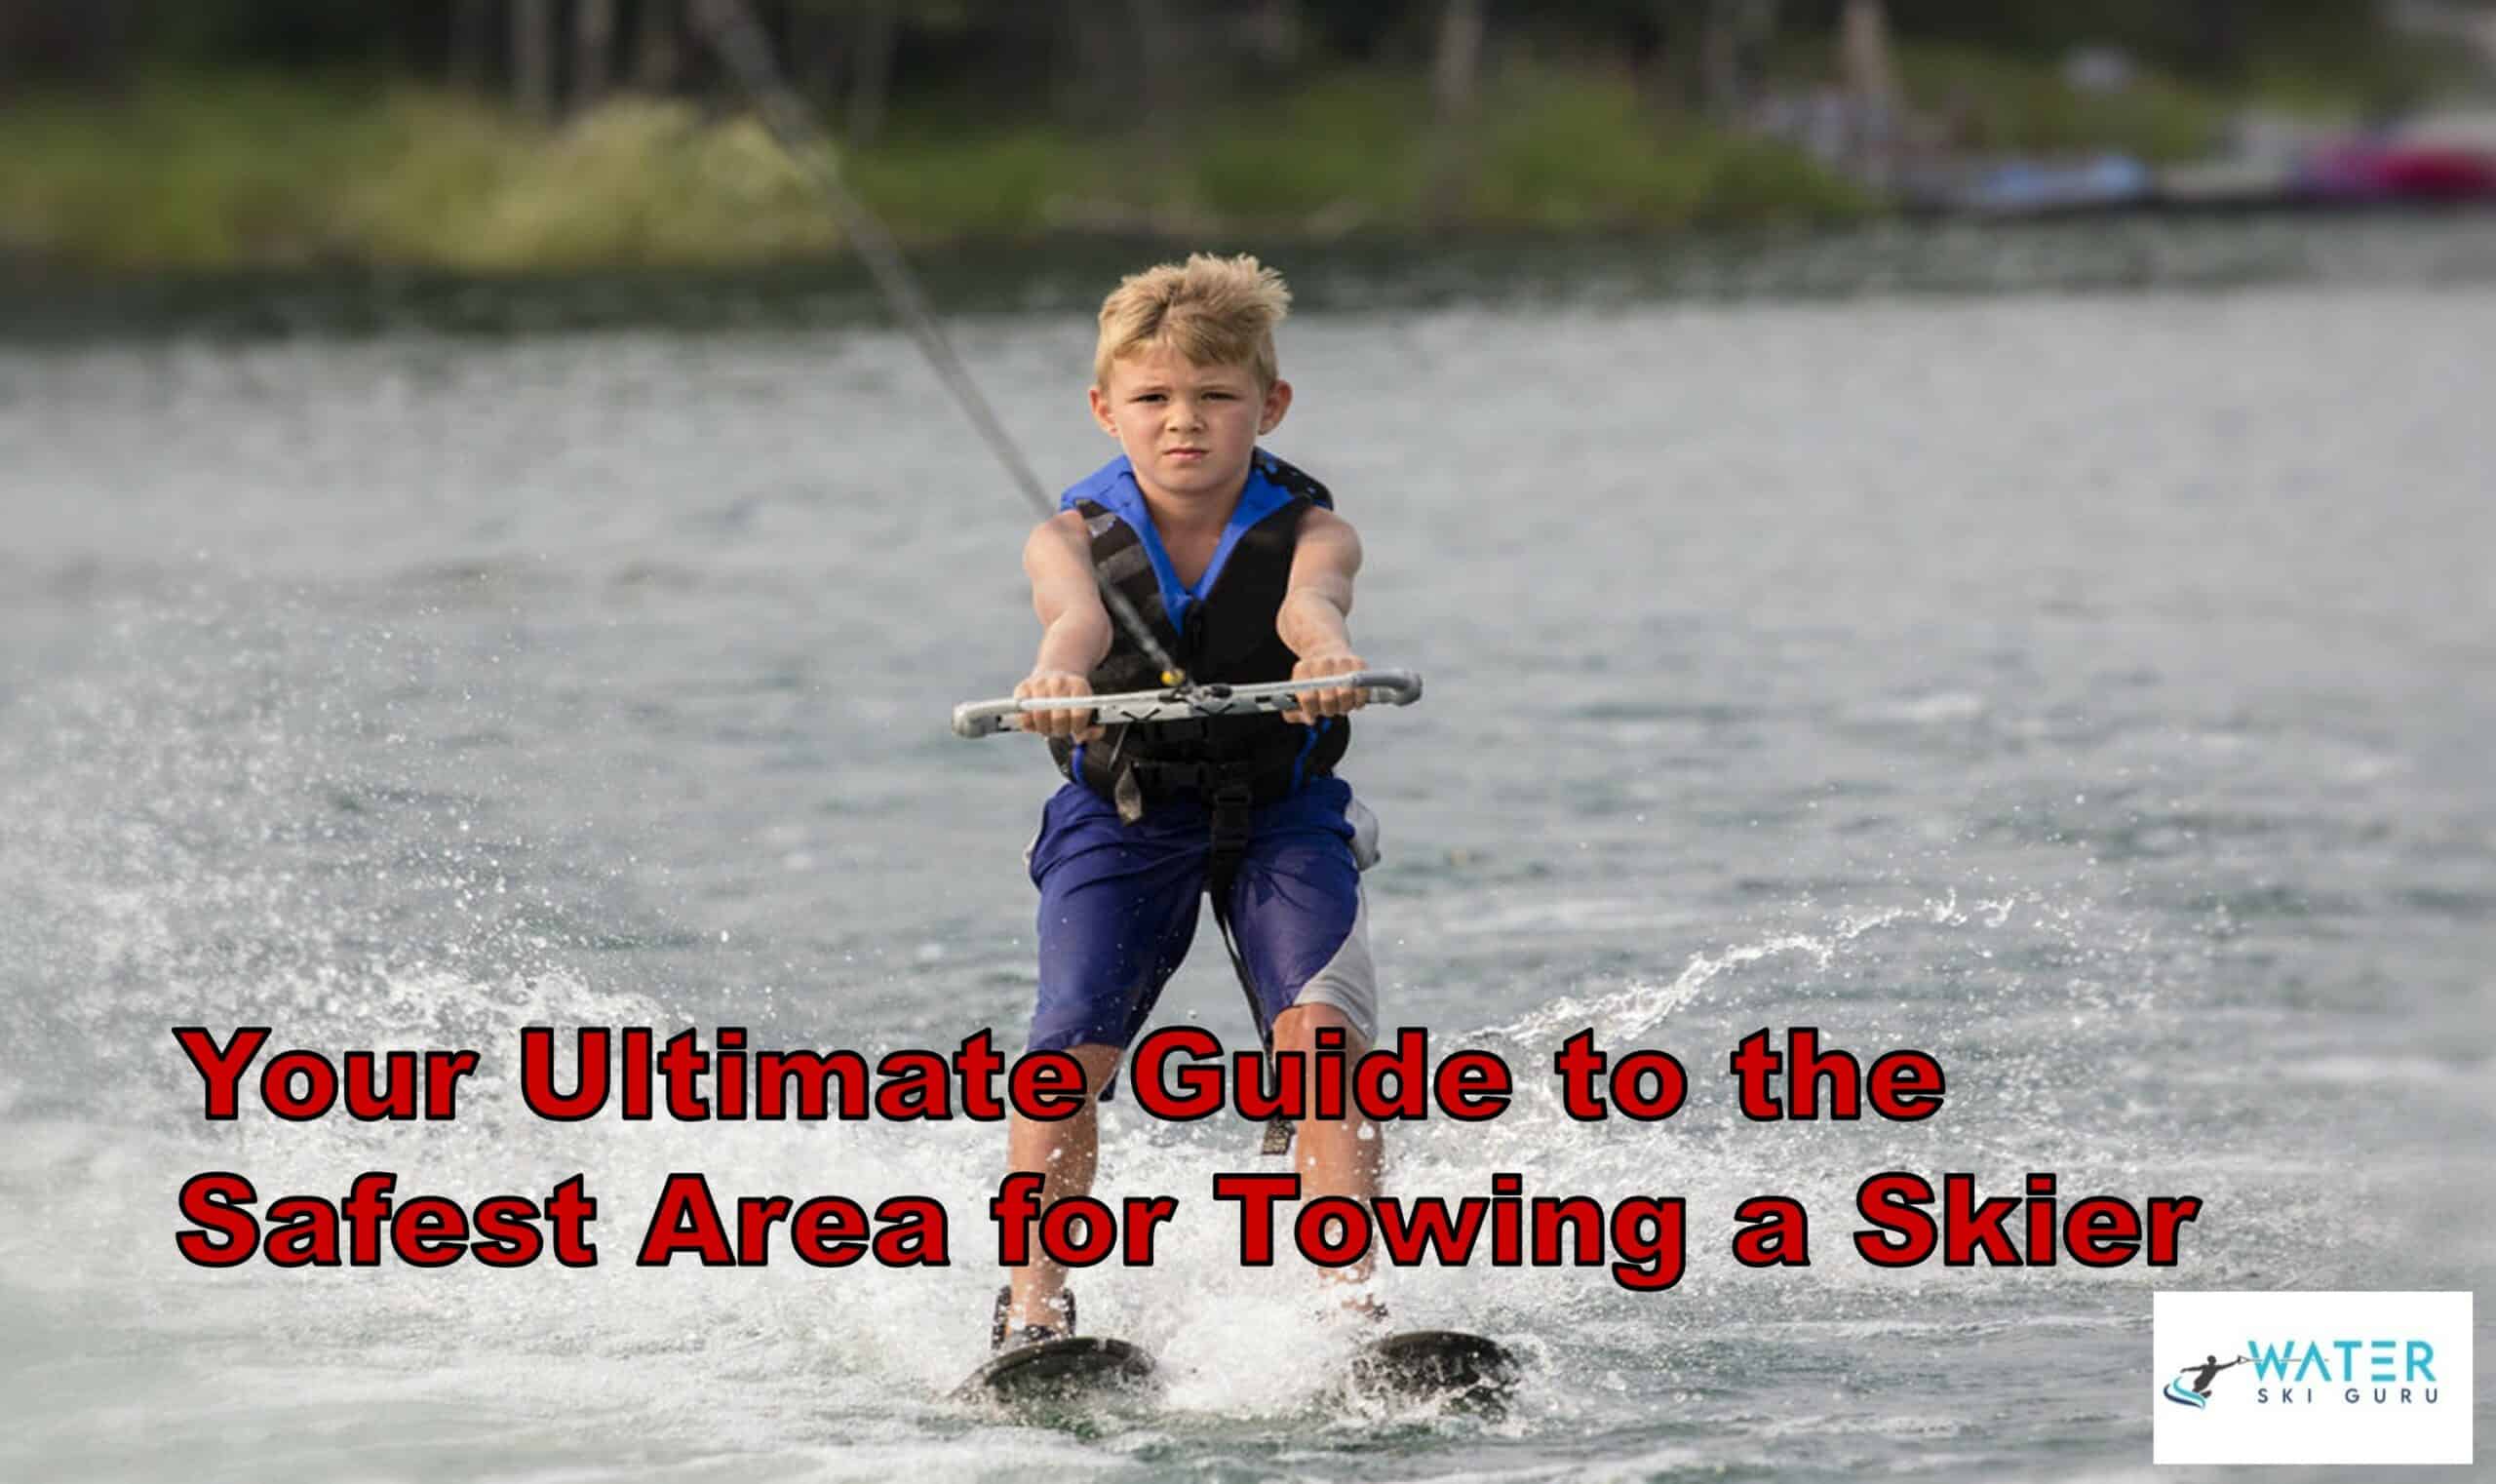 Your Ultimate Guide to the Safest Area for Towing a Skier